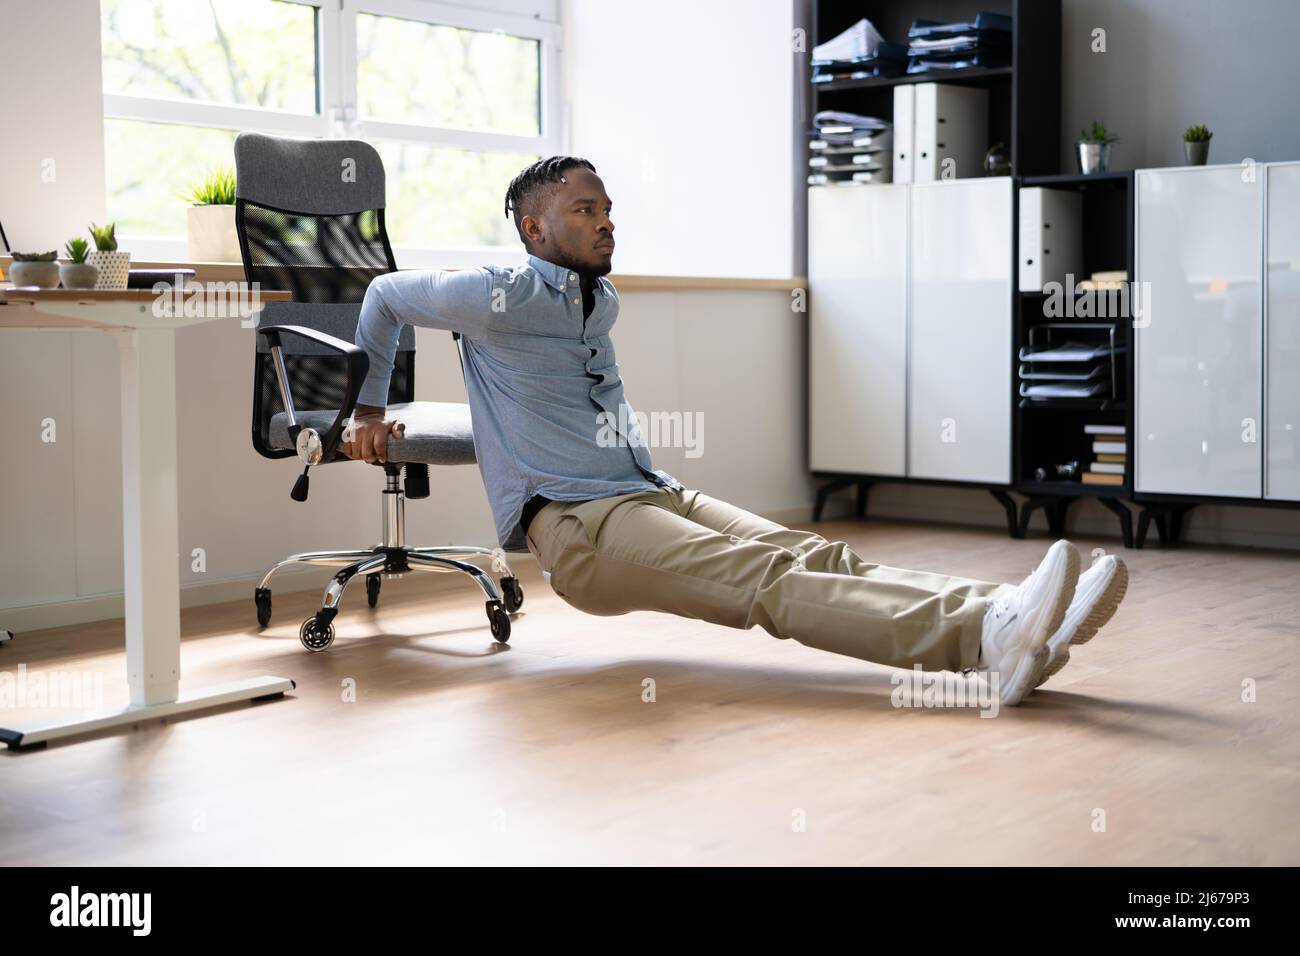 Triceps Dips Chair Exercise At Office Desk Stock Photo - Alamy